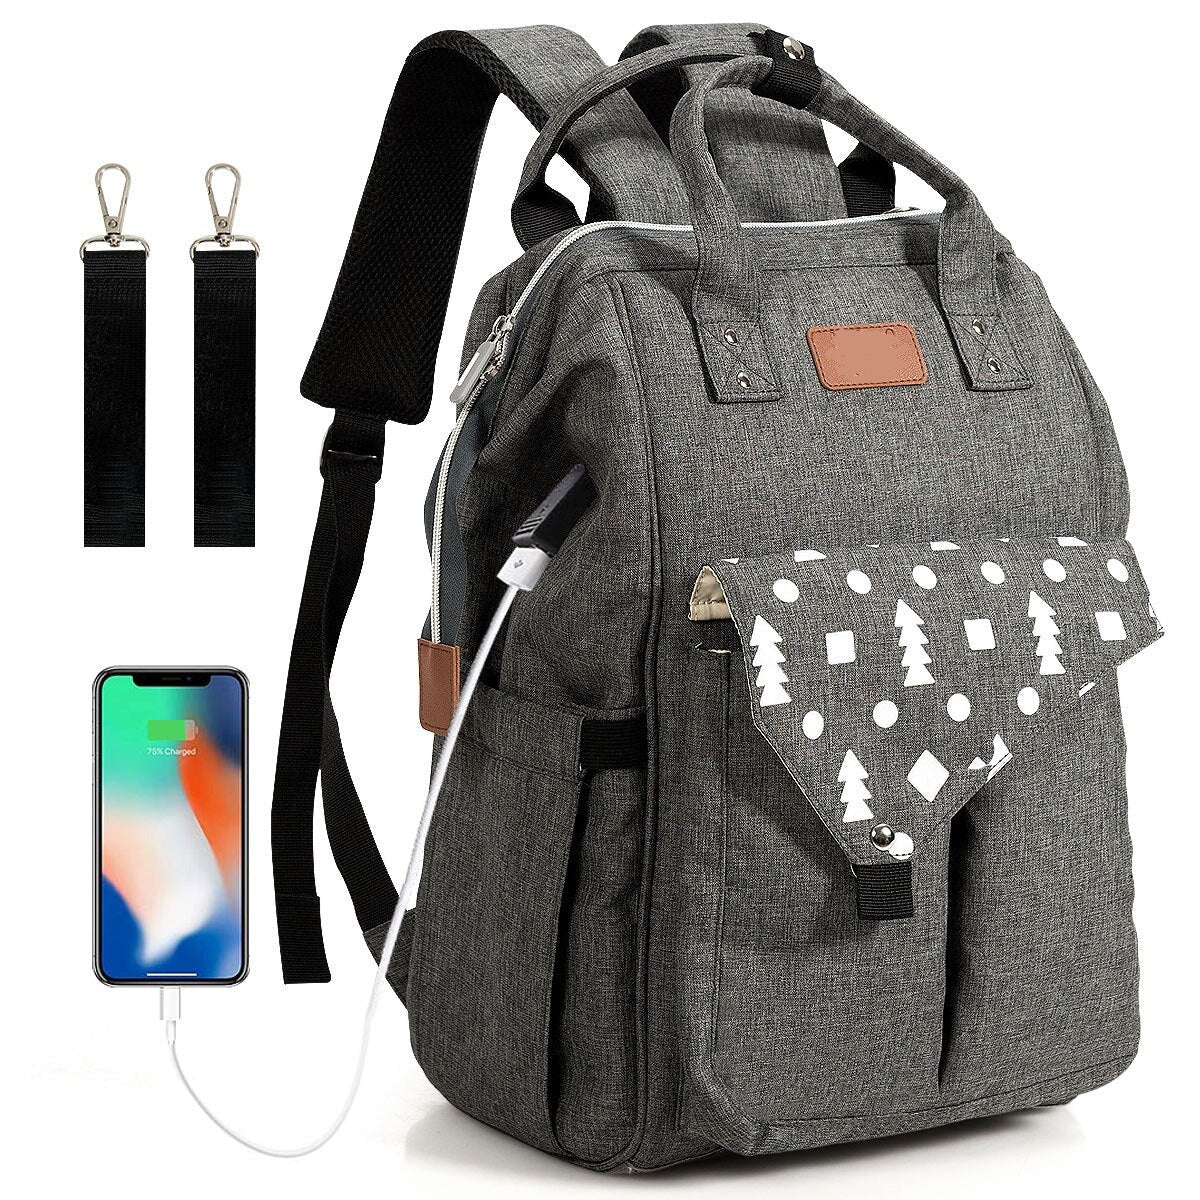 Baby Waterproof Diaper/Nappy Backpack w/USB Charging Port